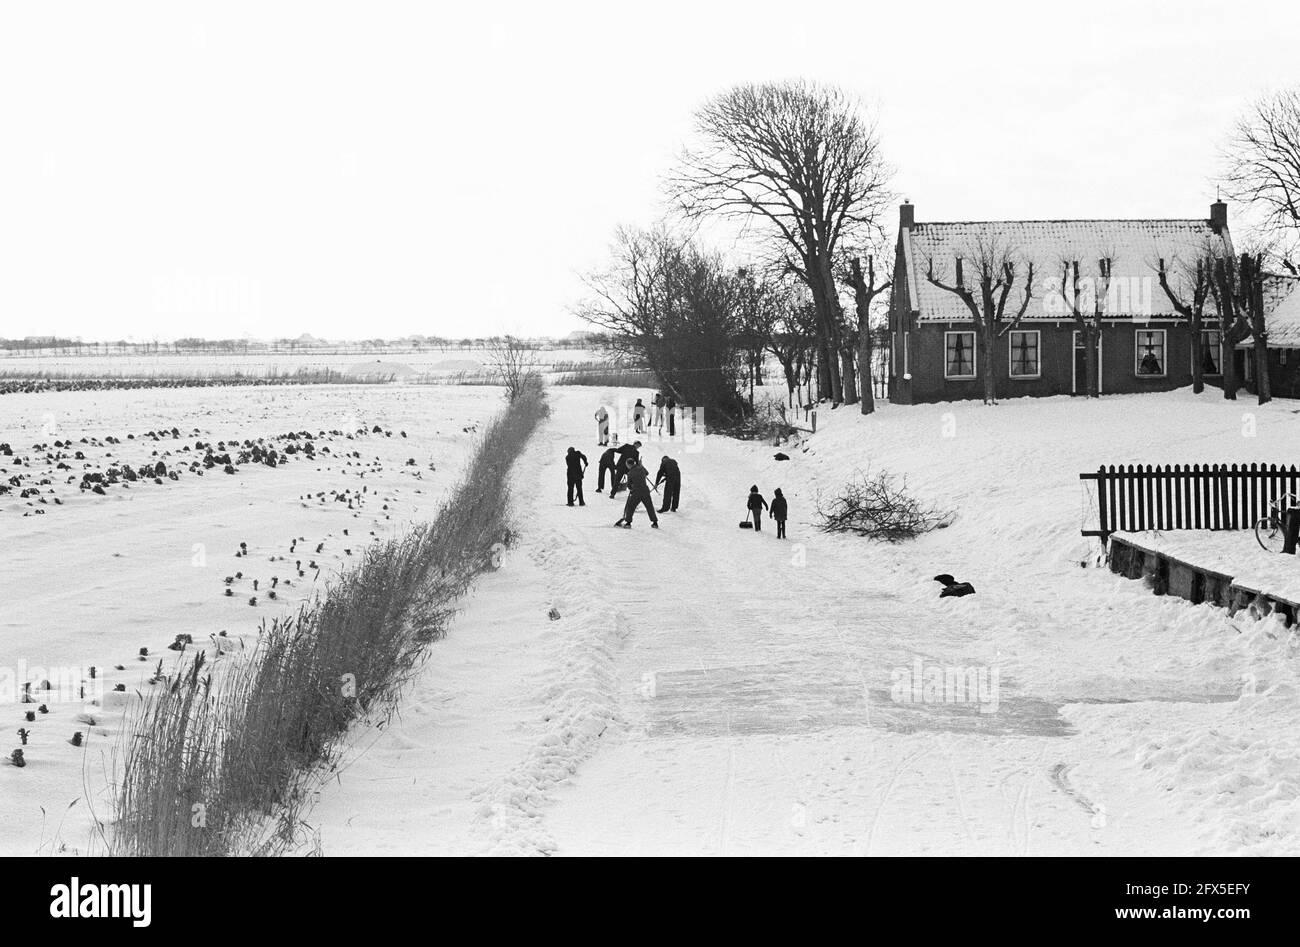 Friesland making preparations for the Elfstedentocht, near the village of Wier they clear the Blikvaart of snow, January 14, 1963, ice, snow, winters, The Netherlands, 20th century press agency photo, news to remember, documentary, historic photography 1945-1990, visual stories, human history of the Twentieth Century, capturing moments in time Stock Photo